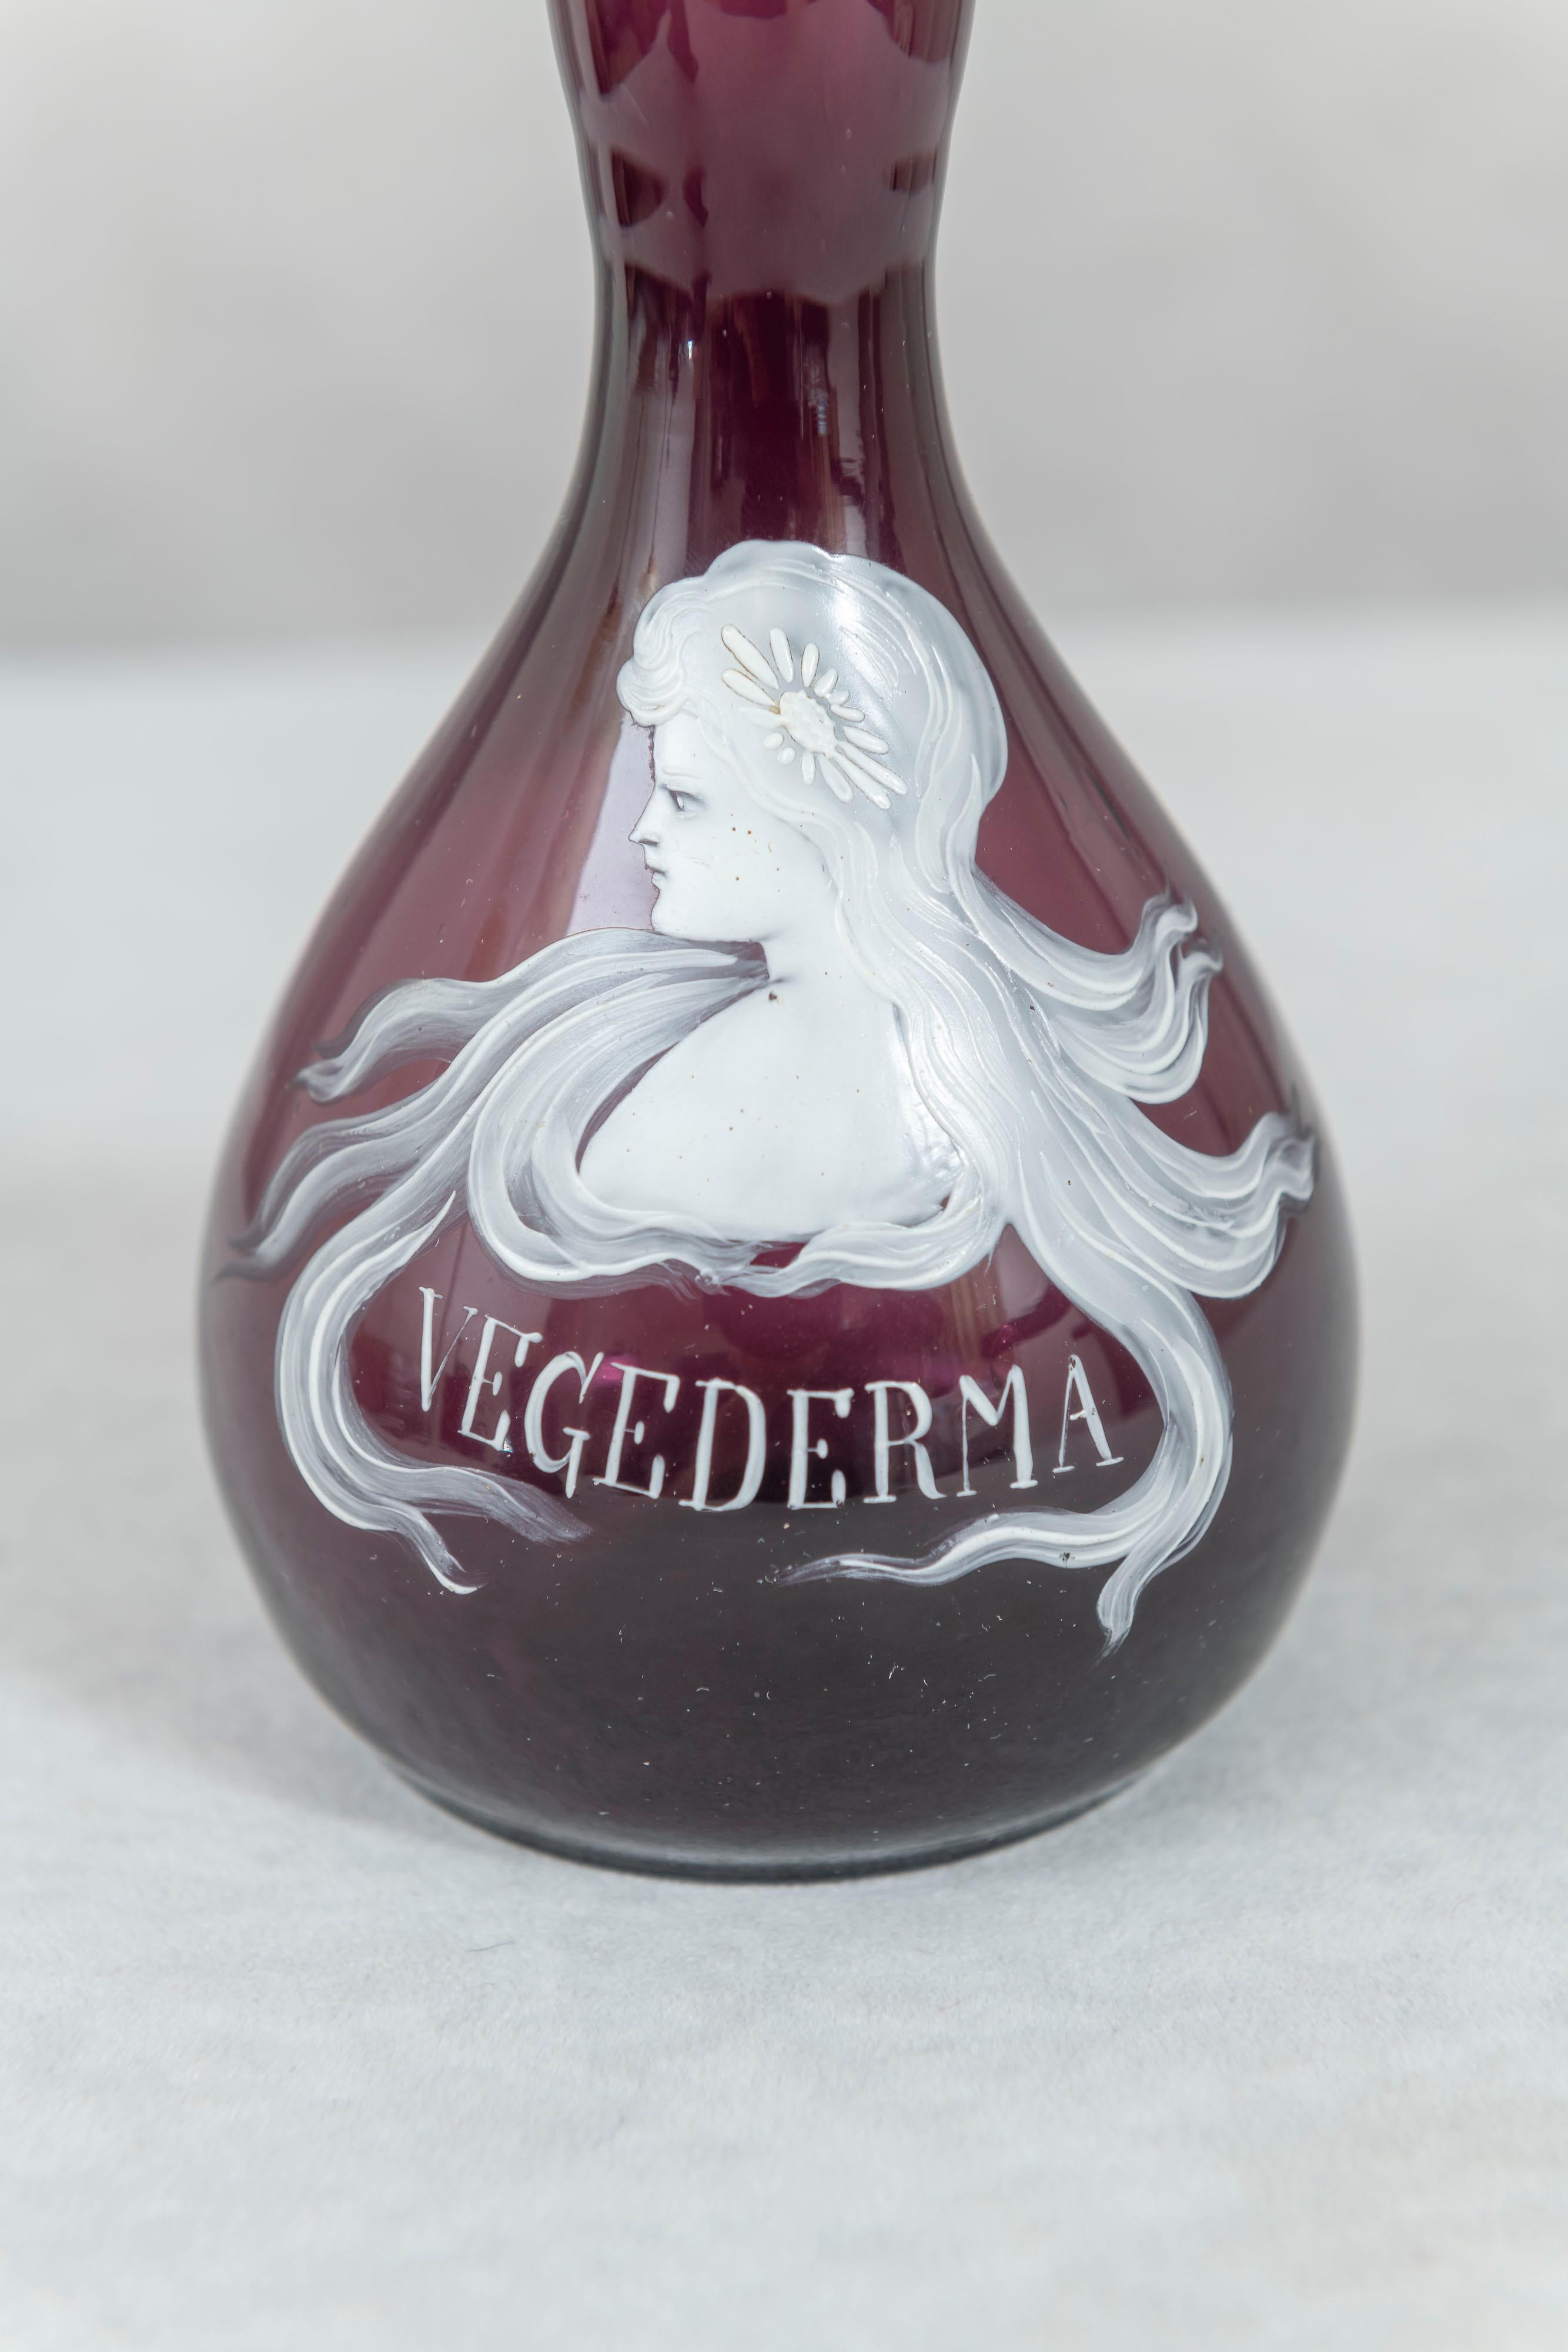 This period Art Nouveau bottle was used to hold Vegederma, a skin product. The beautiful young girl on the front is done by Mary Gregory. If you look up her work you will see glass with enameled relief patterns in white. Usually it's children,